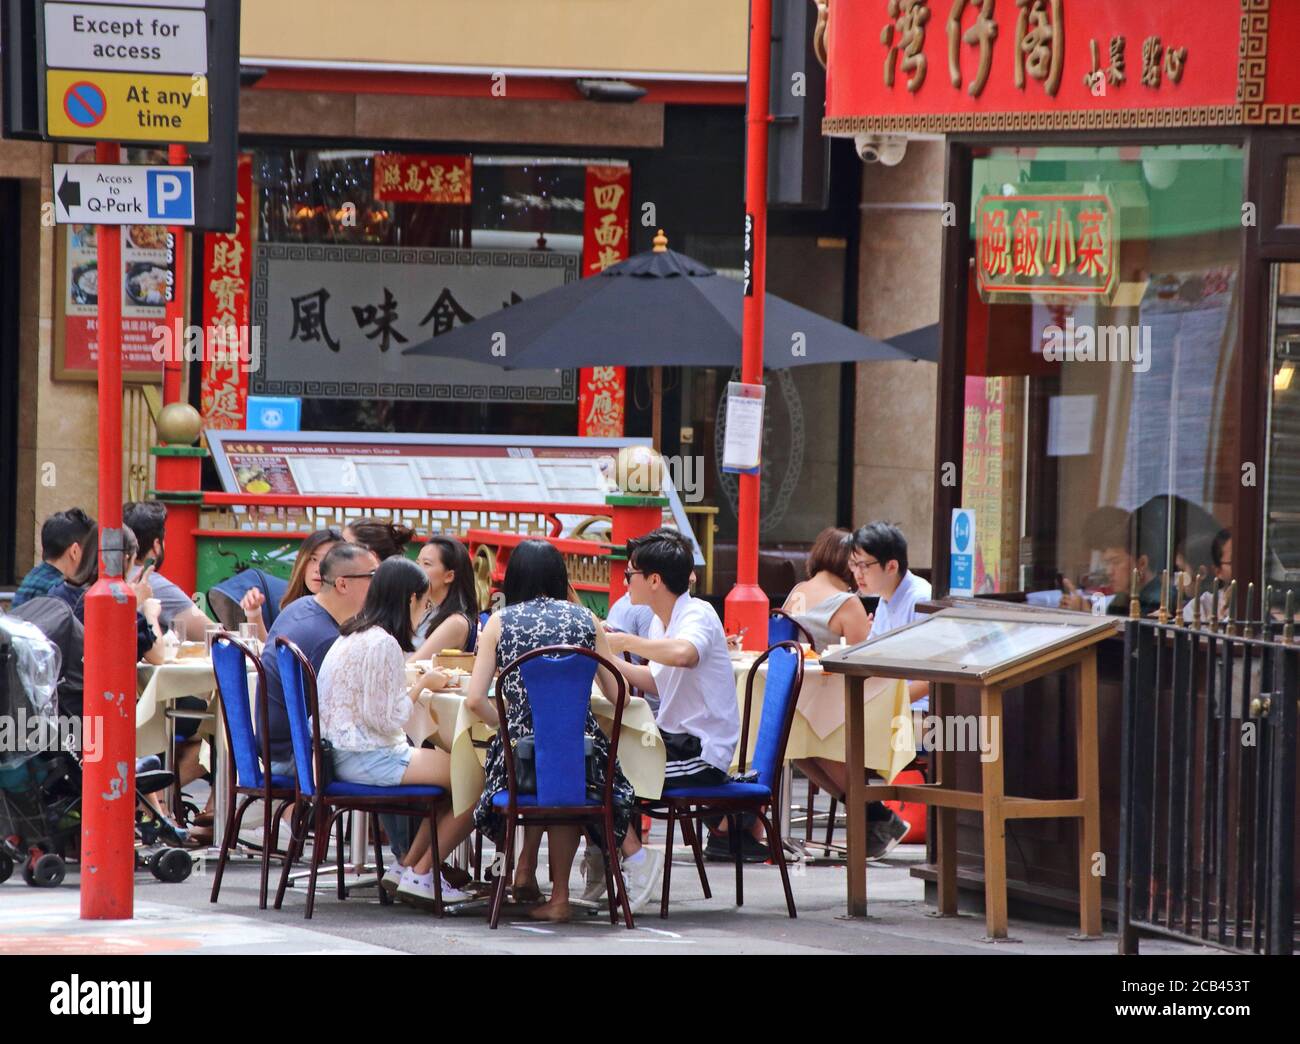 London. UK. A far cry from the empty, desolate streets of lockdown days due to the Cornavirus pandemic, London's Chinatown has embraced the new outdoor dining culture and the streets are busier and restaurants doing good business again in Gerrard Street, London. 1st August 2020. Ref:LMK73-S3075-020820 Keith Mayhew/Landmark Media  WWW.LMKMEDIA.COM. Stock Photo